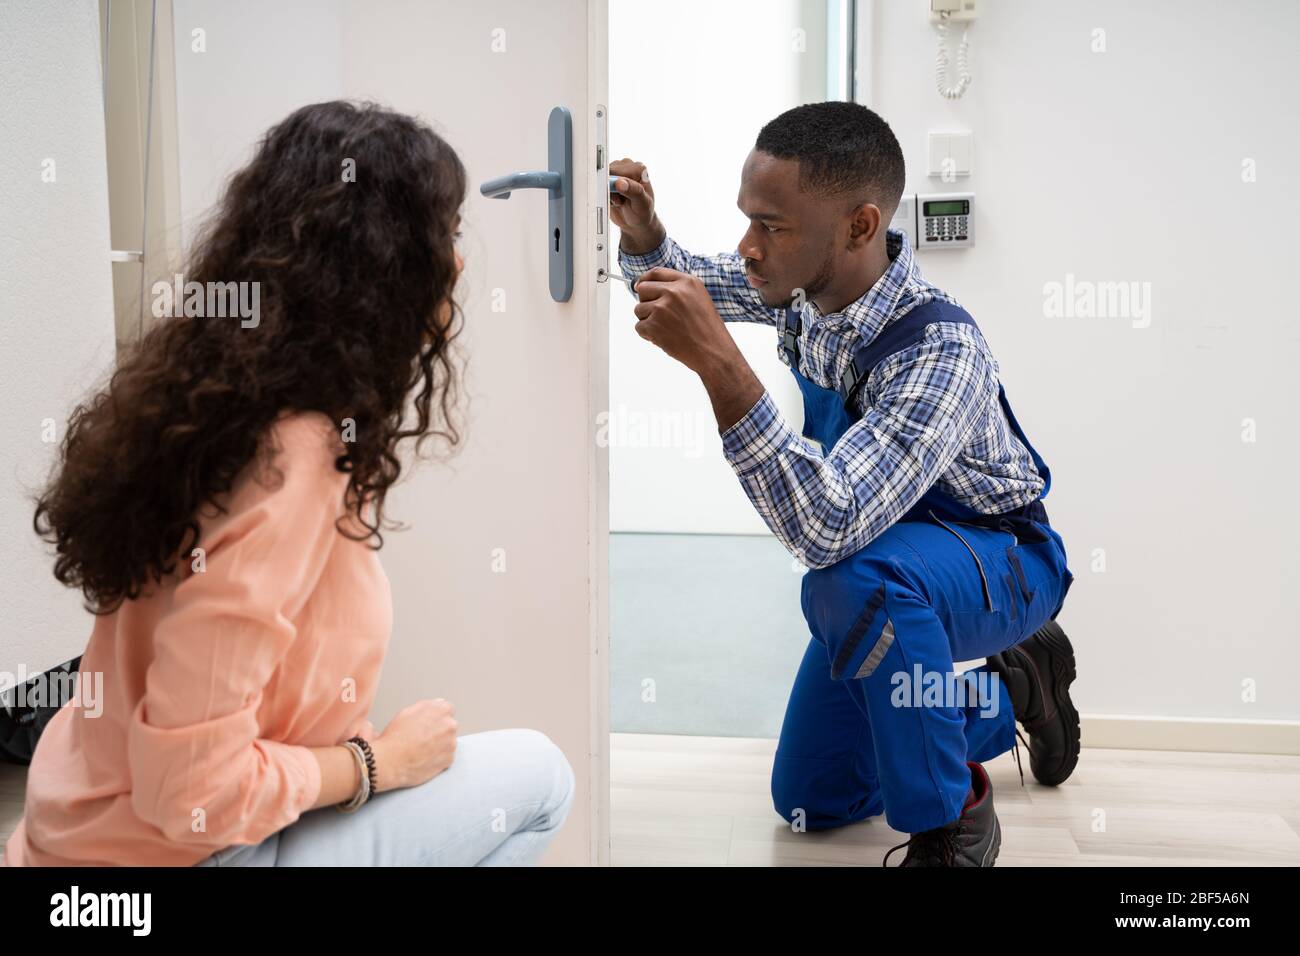 Smiling Woman Looking At Technician Fixing The Door Lock With Screwdriver At Home Stock Photo